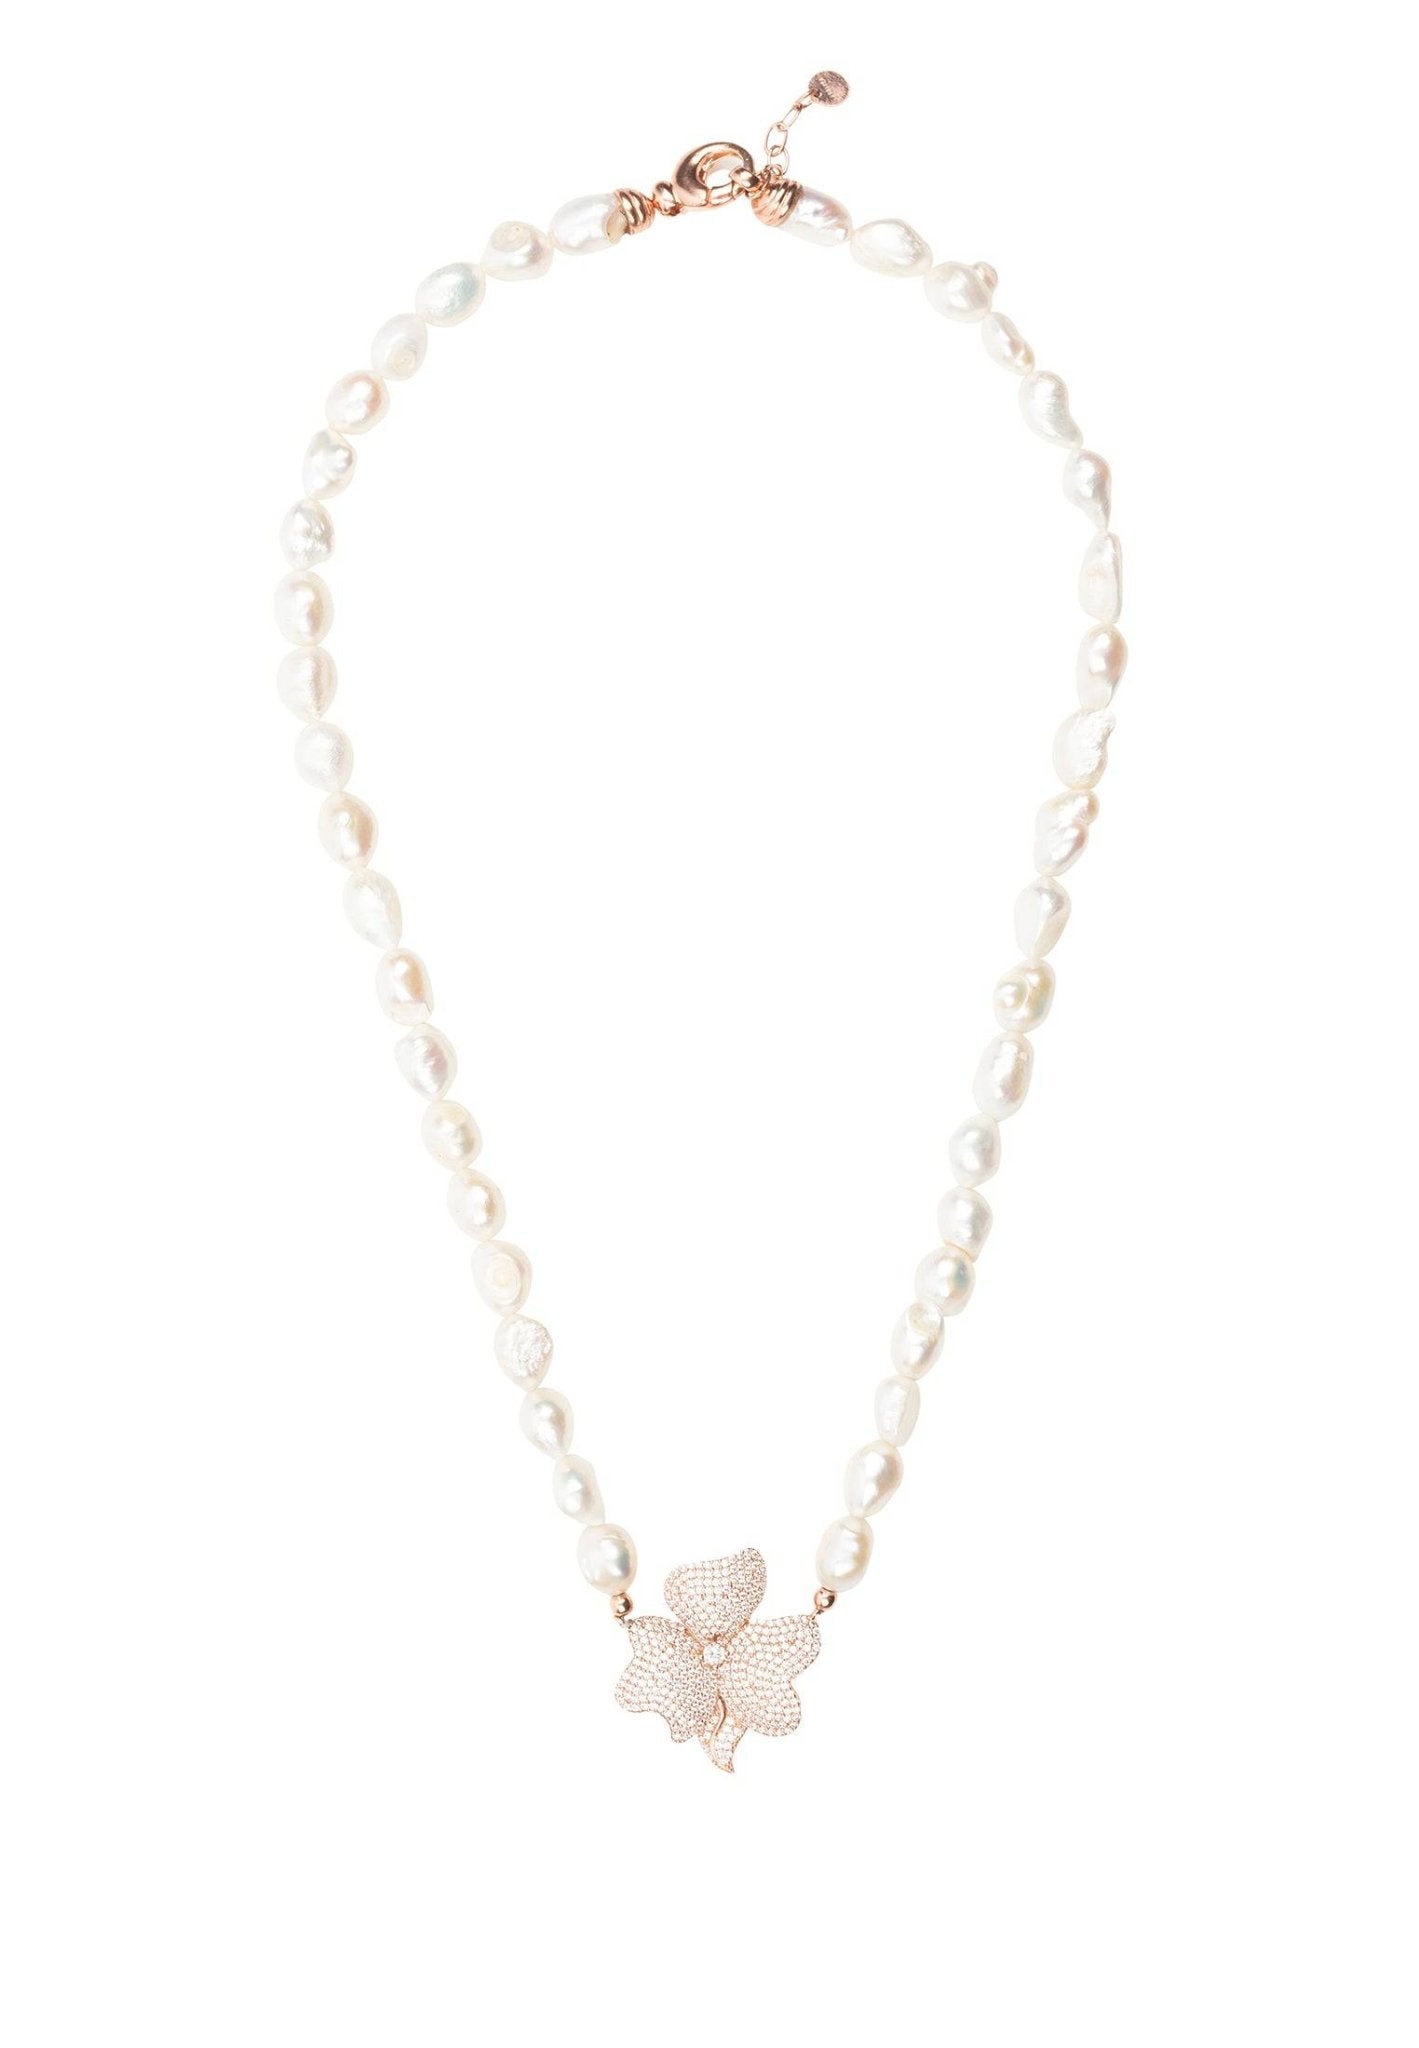 Flower Pearl Mid Length Necklace White Cz Rosegold - LATELITA Necklaces